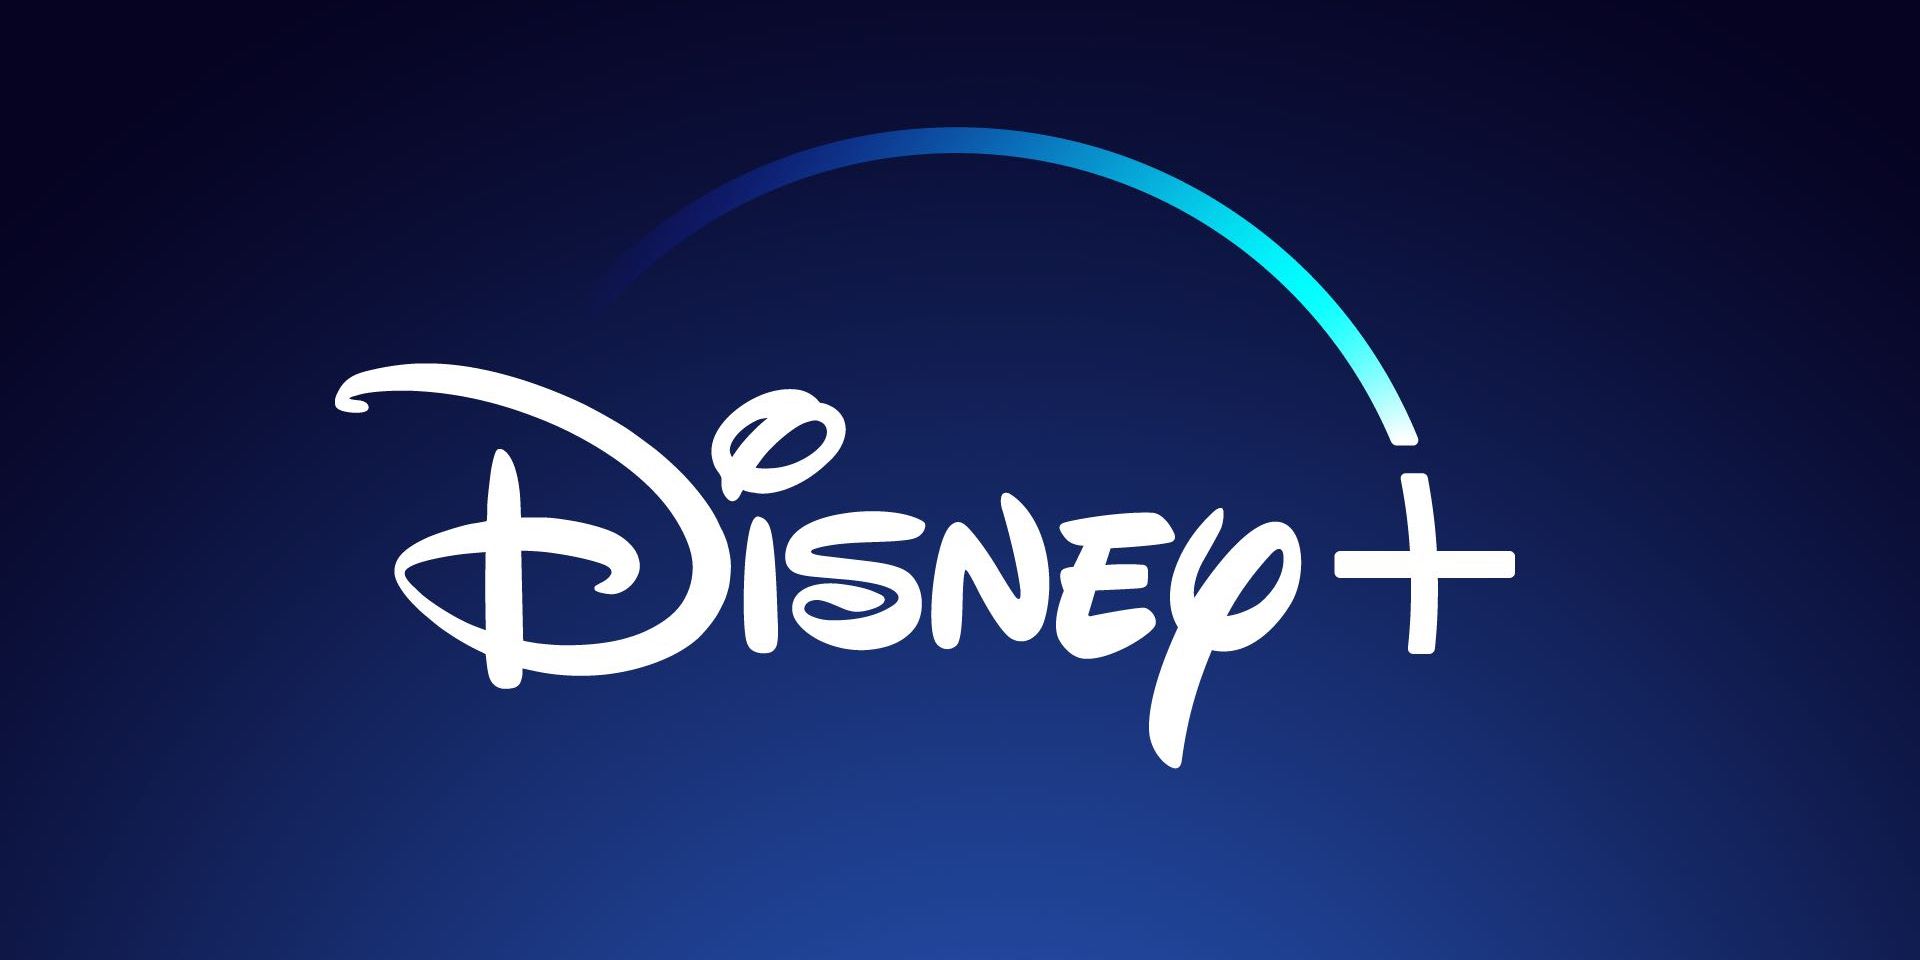 Disney+: Every New Movie & TV Show Coming In September 2020